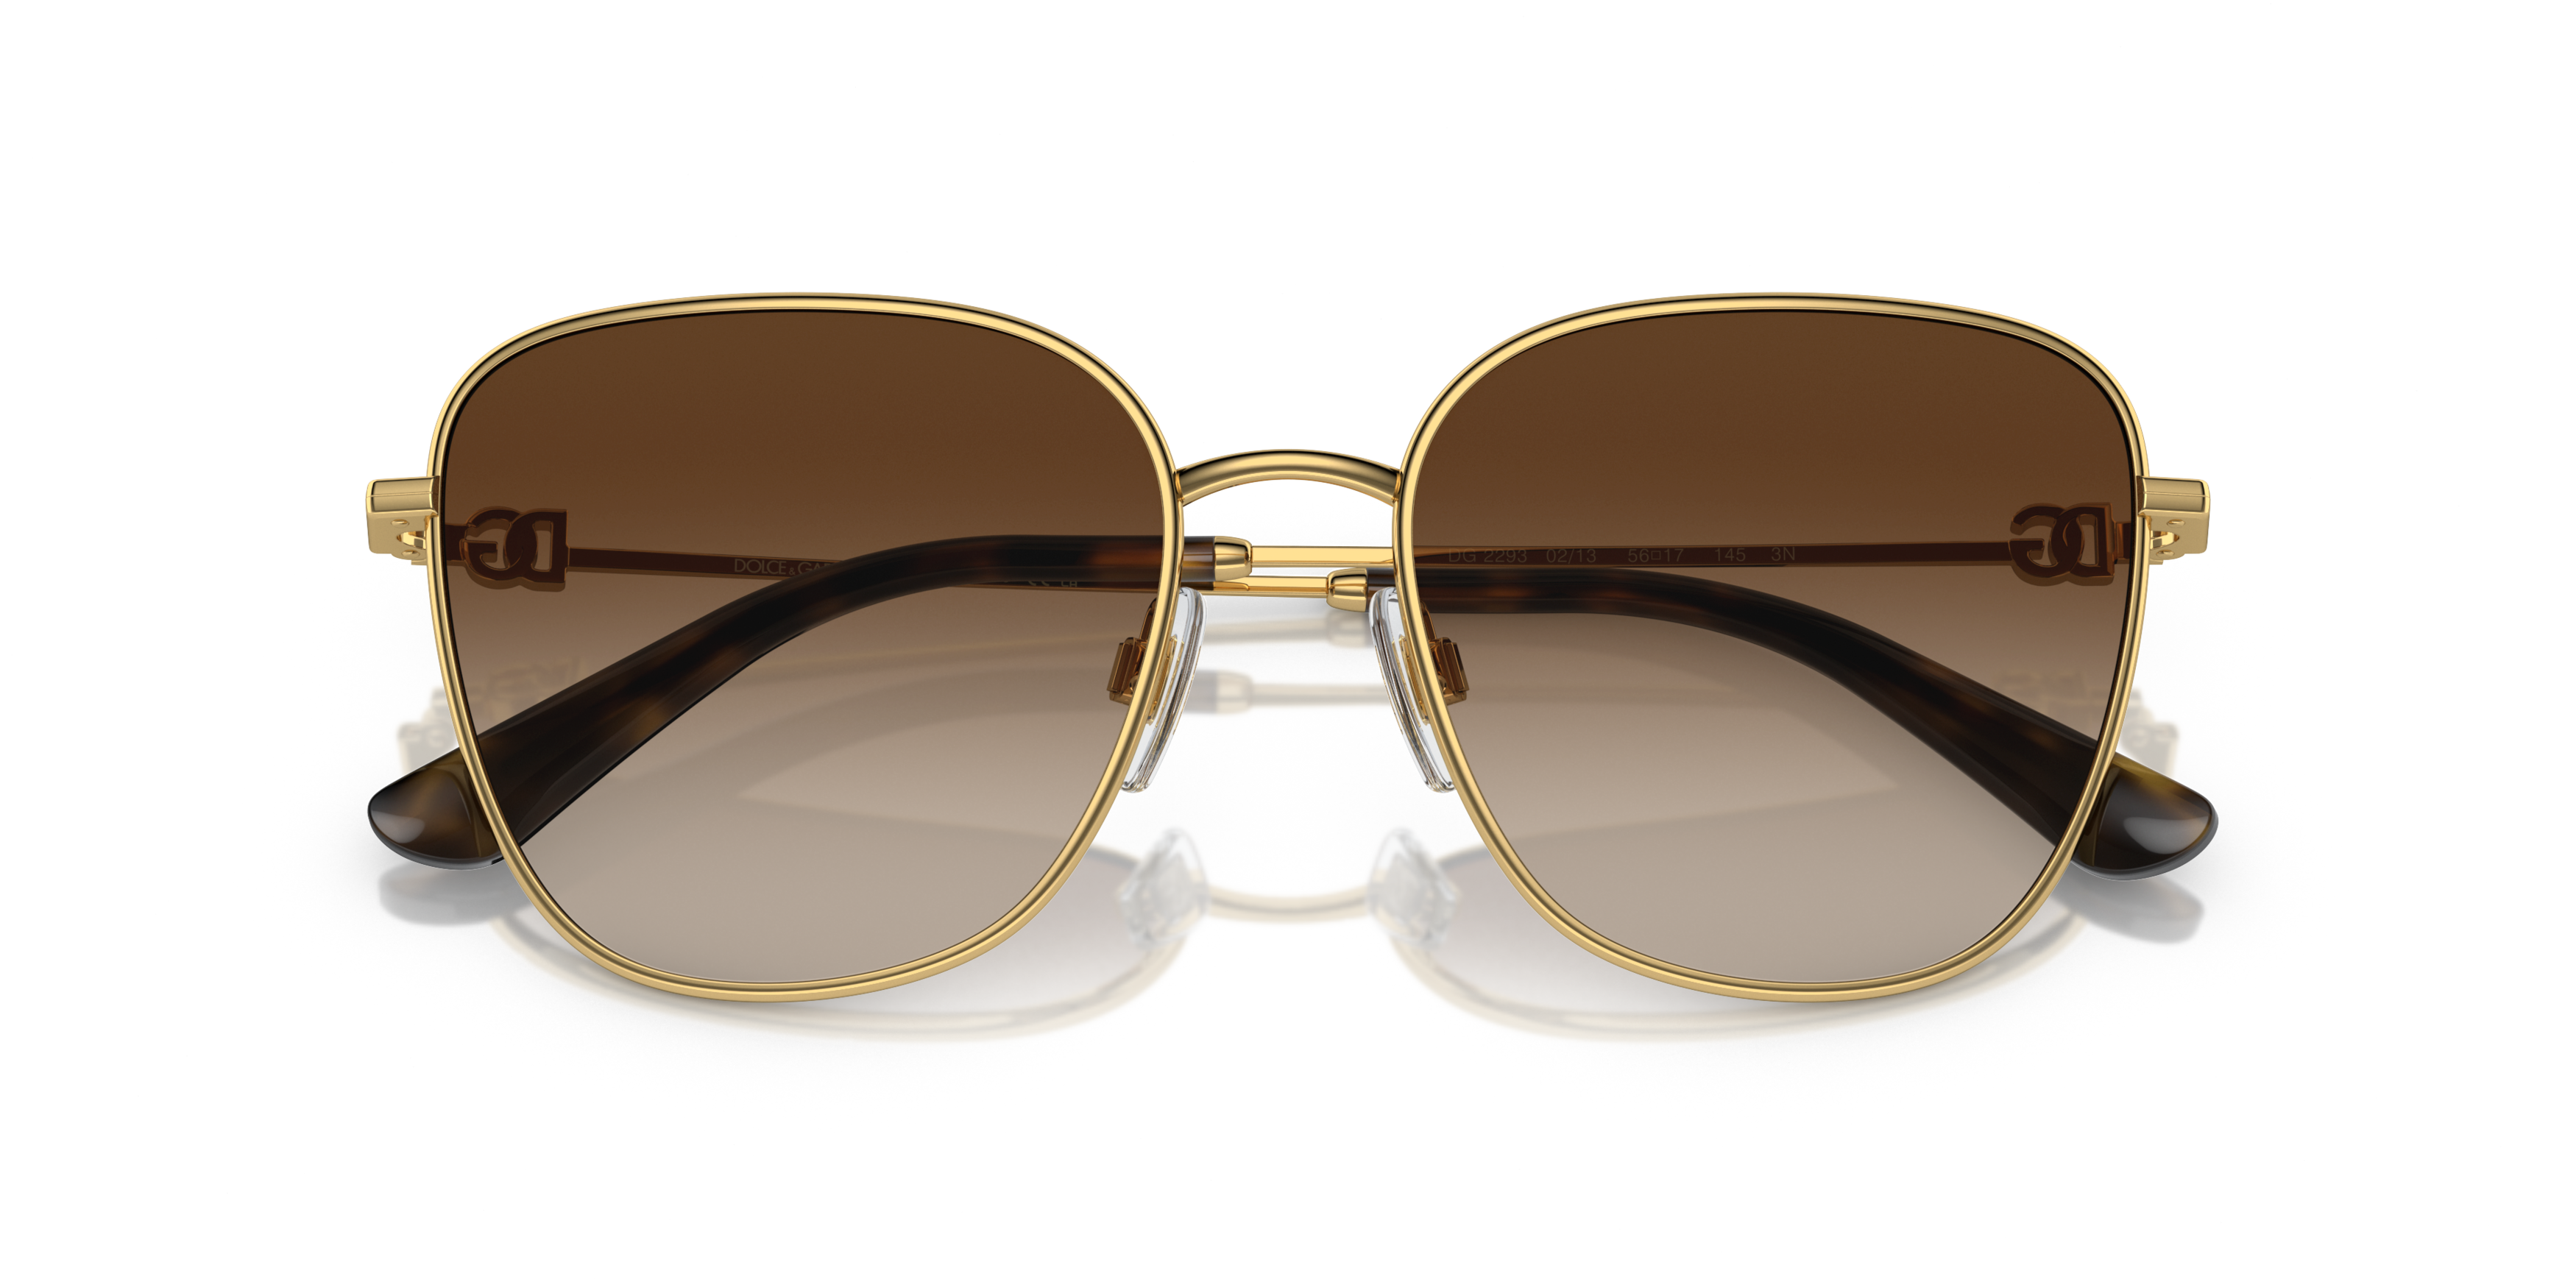 [products.image.folded] Dolce and Gabbana 0DG2293 02/13